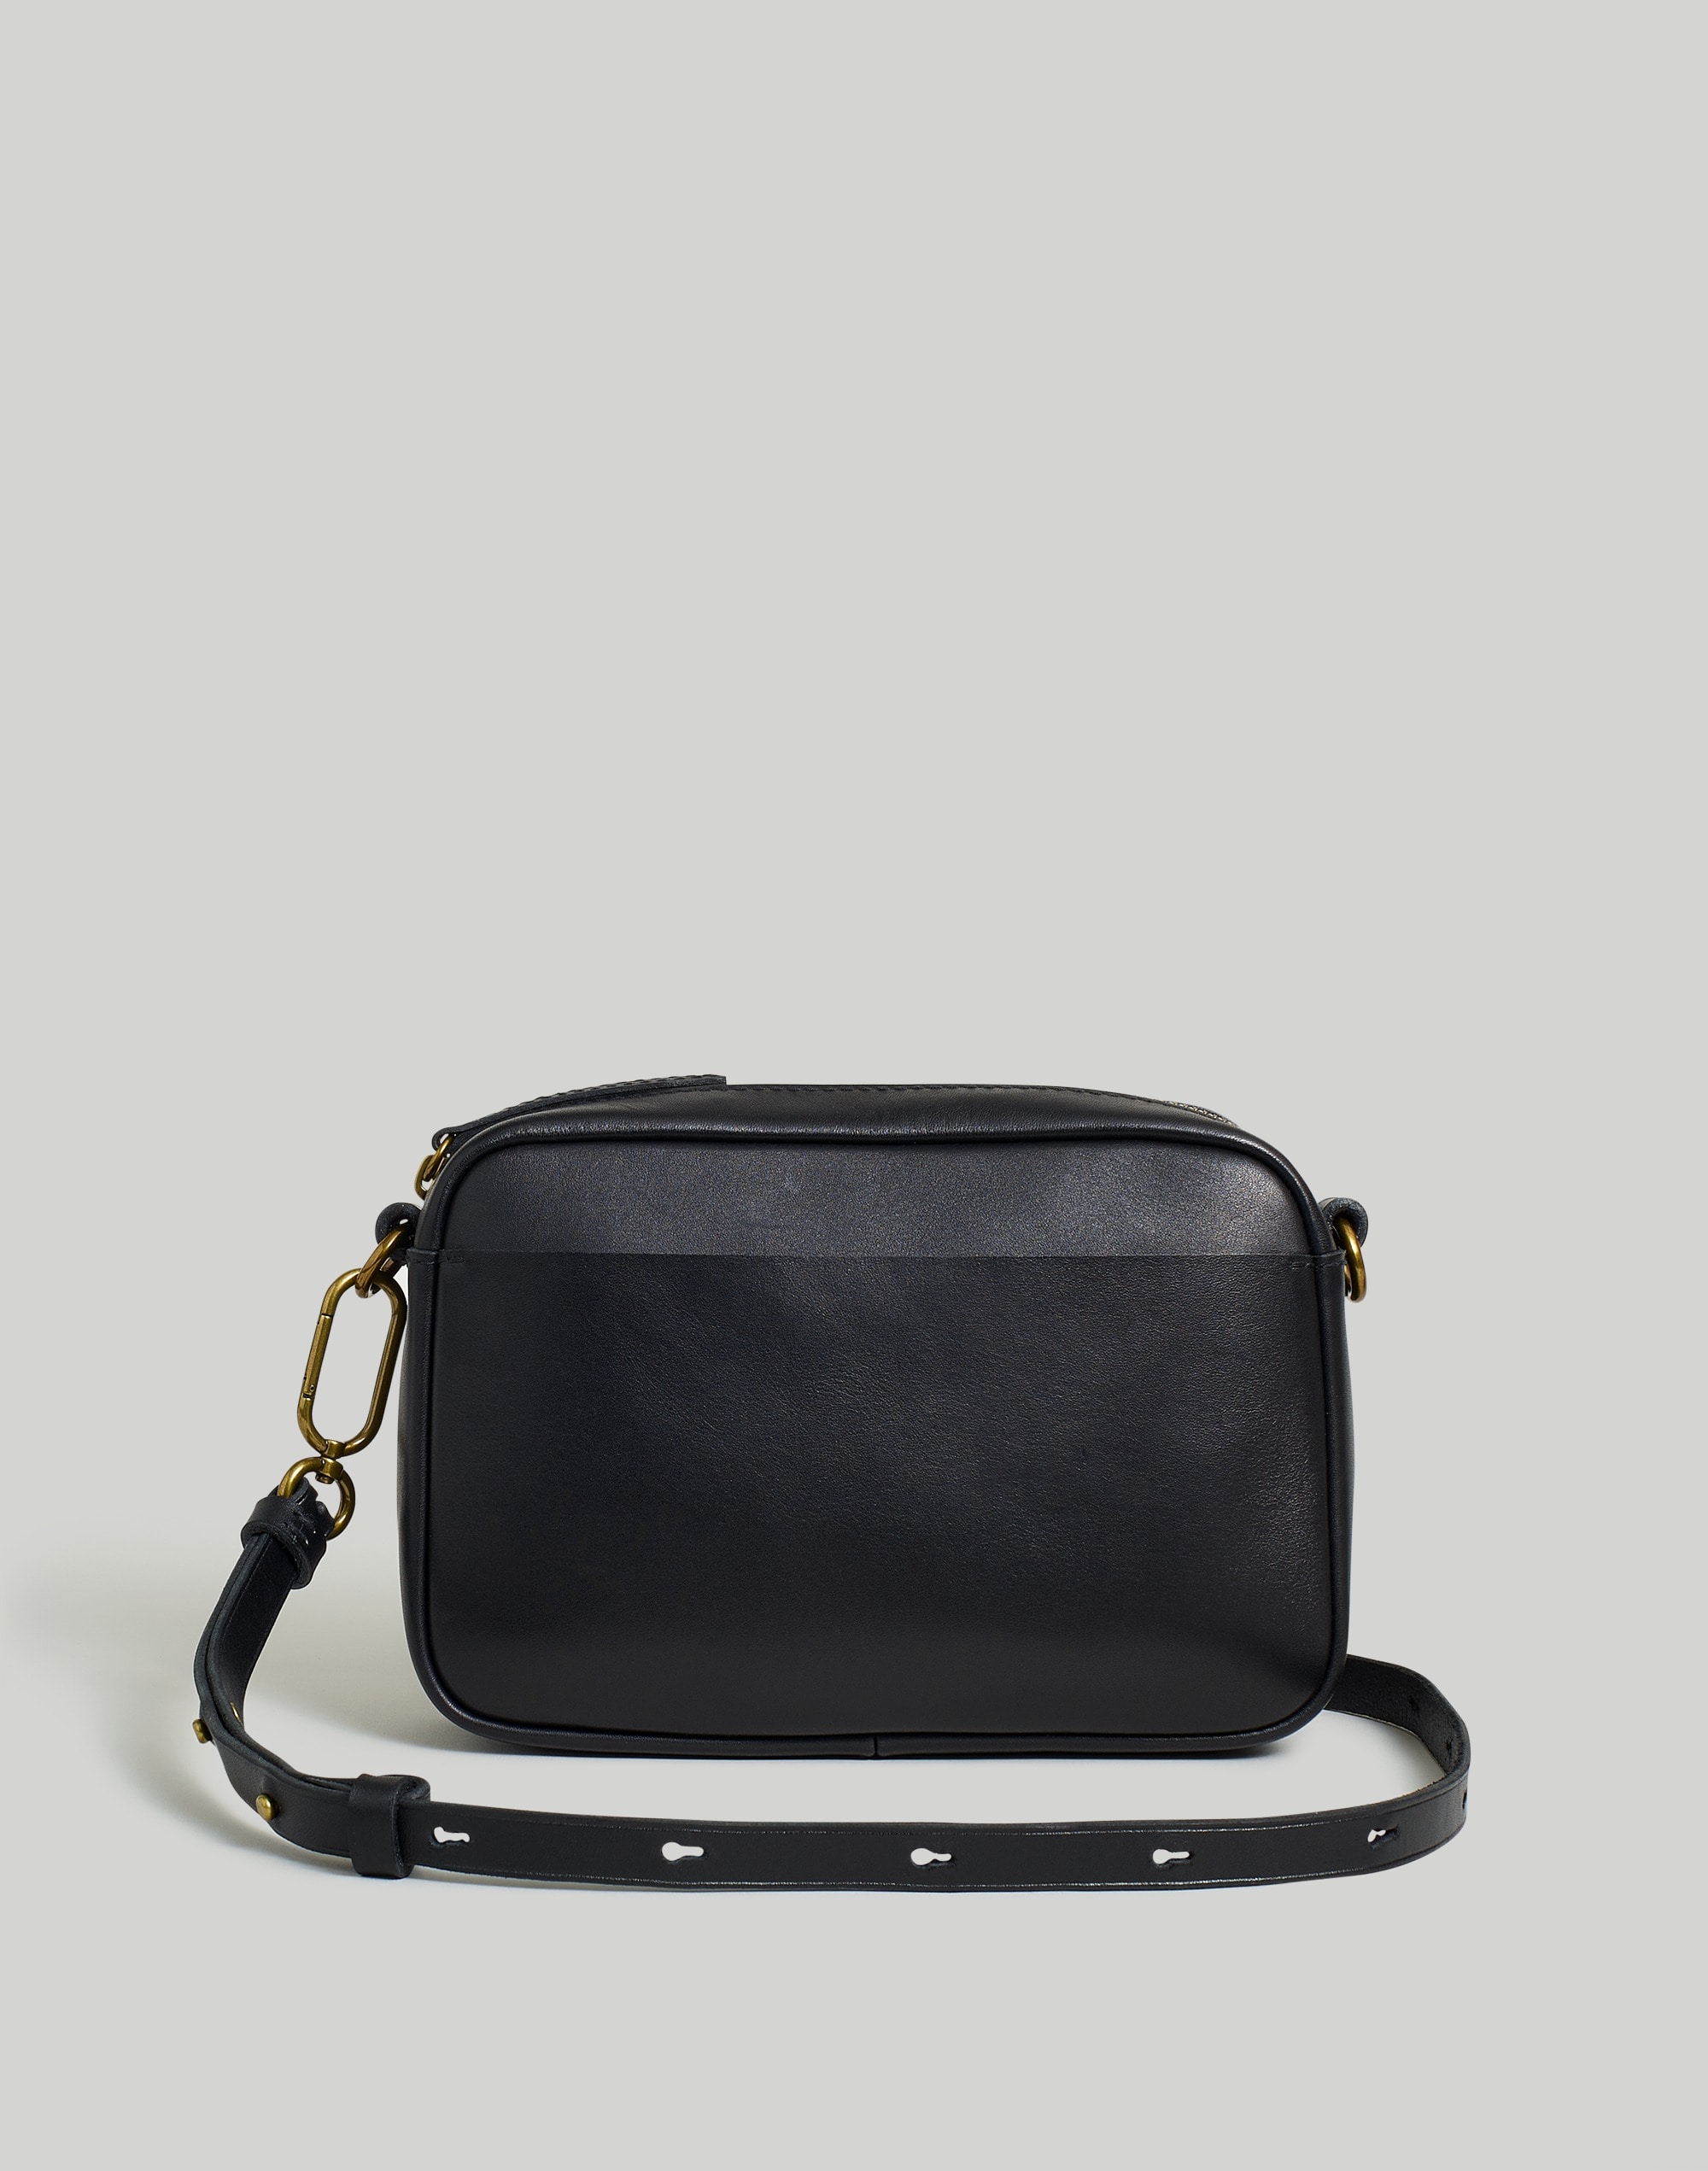 Madewell The Leather Carabiner Crossbody Sling Bag: Webbing Strap Edition in Timber Beam - Size One S